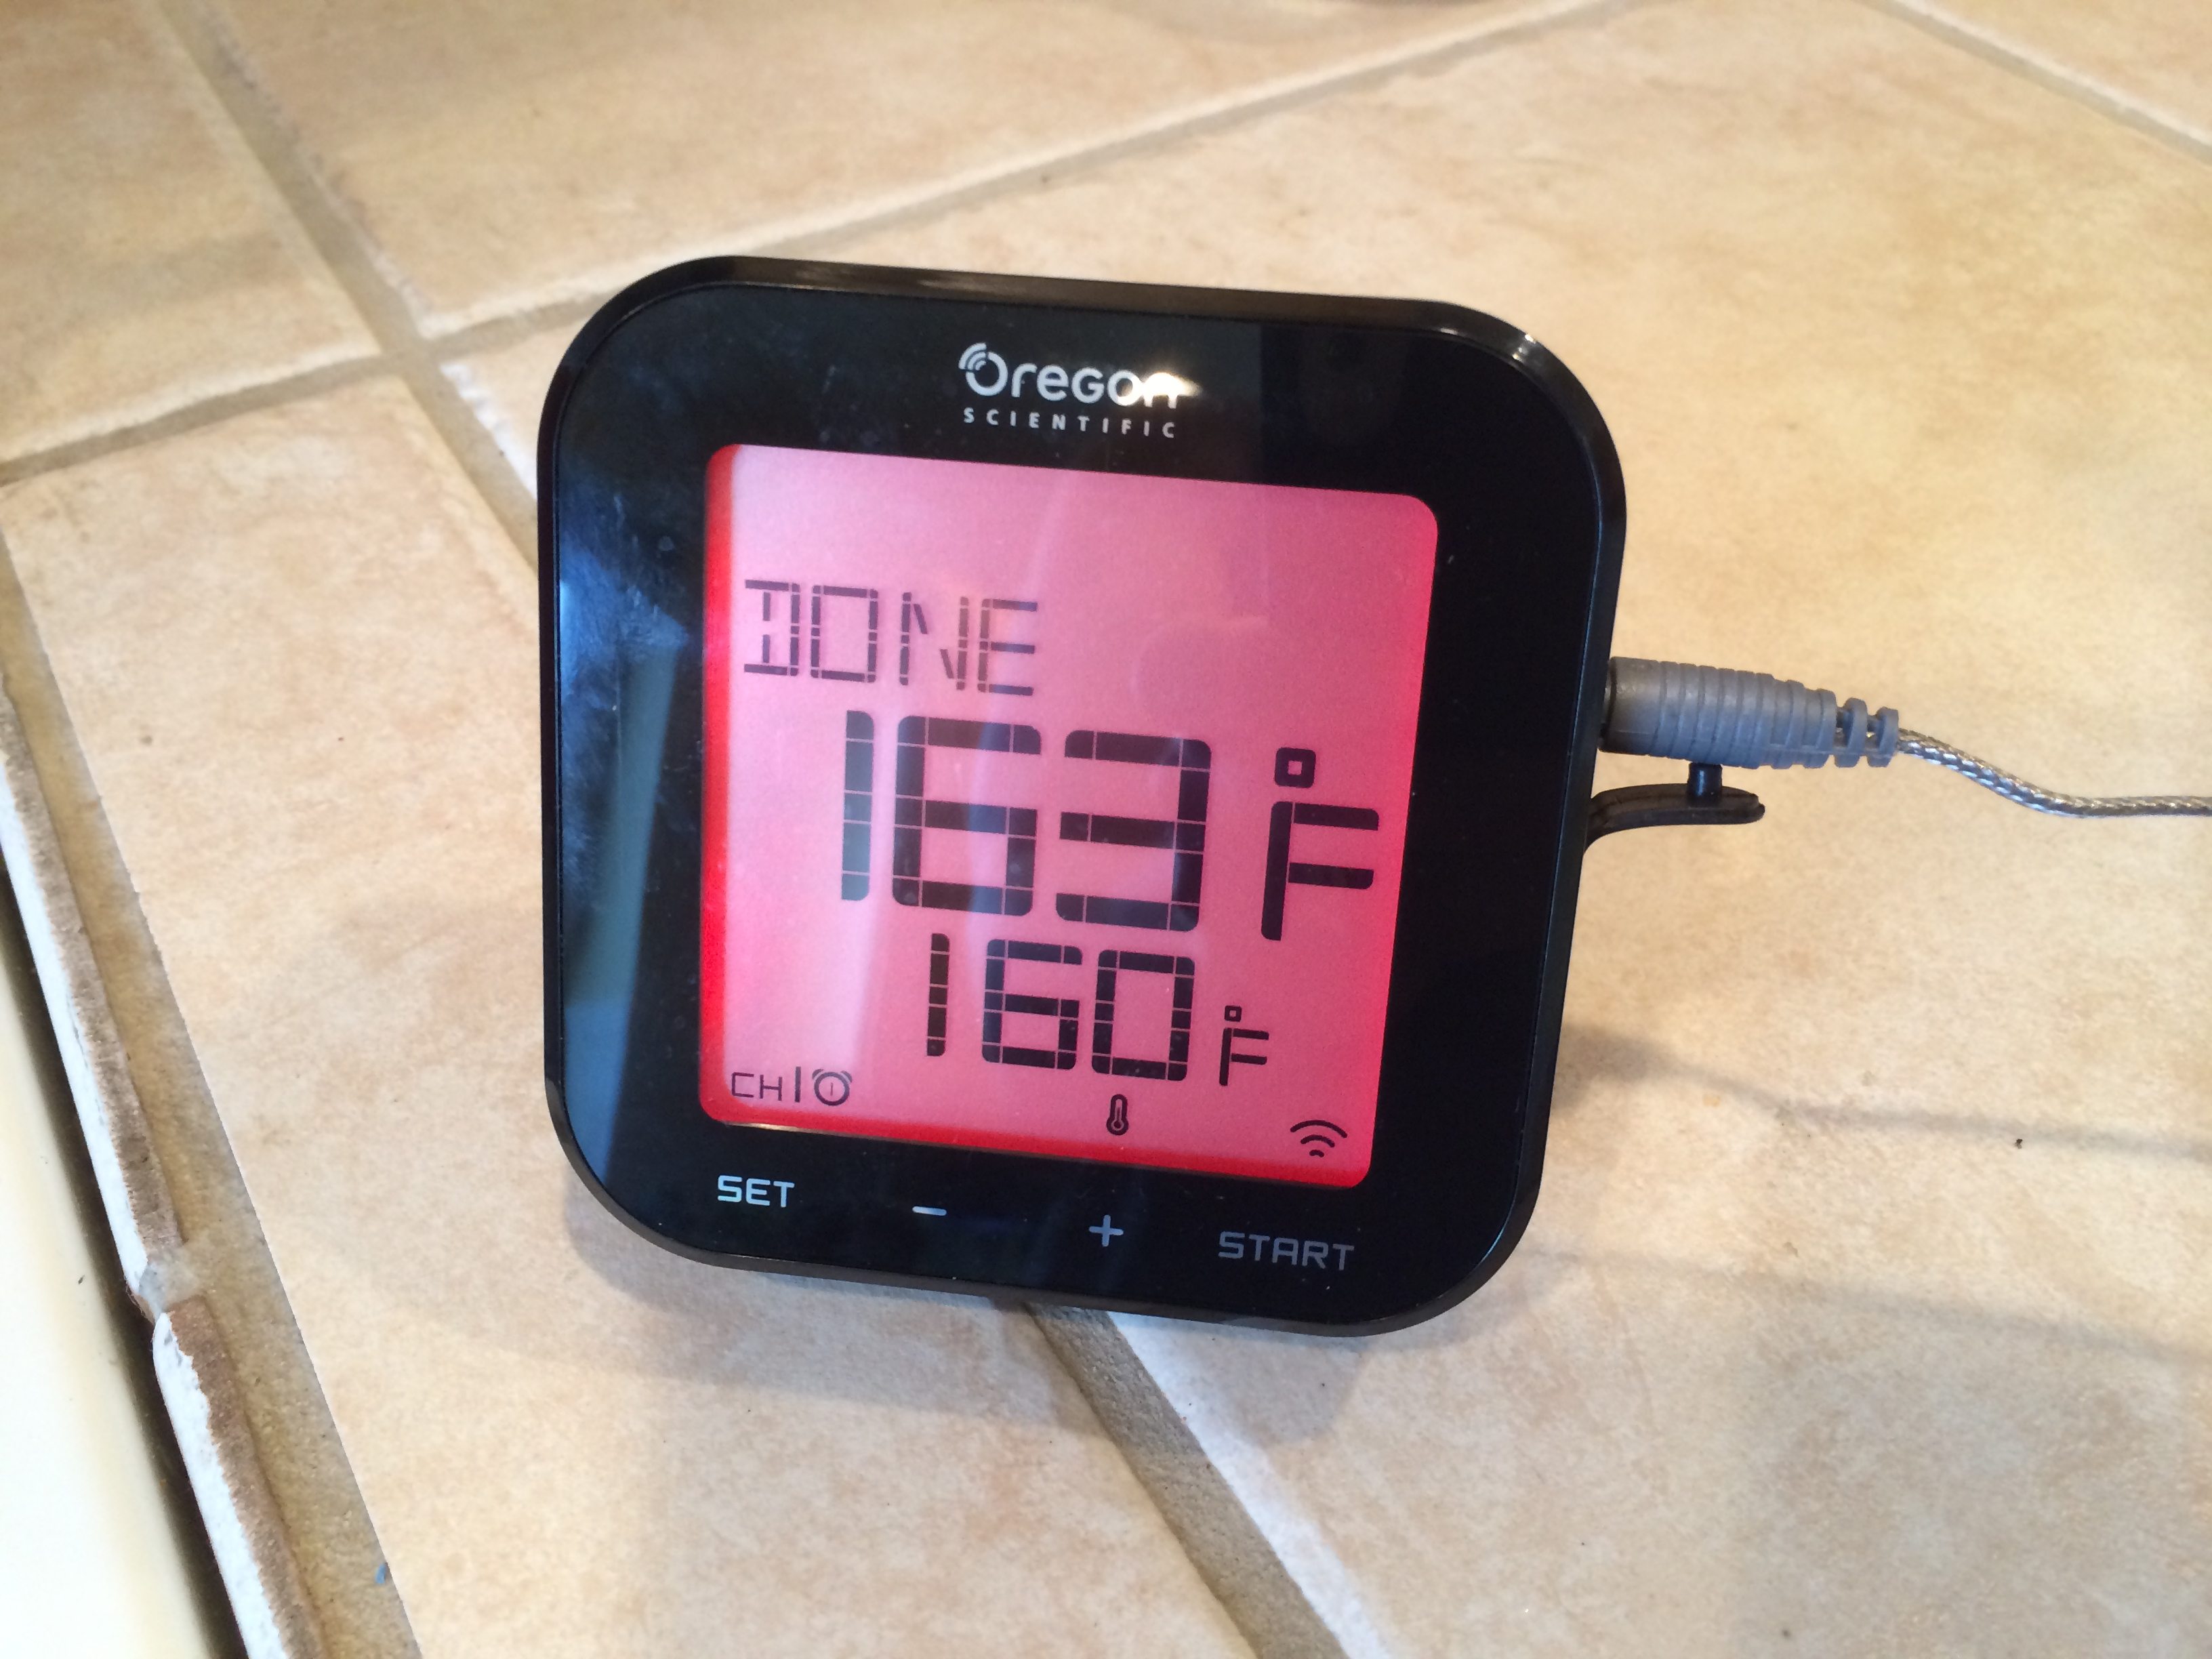 ENZOO 500FT Wireless Meat Thermometer with 4 Probes for Grilling